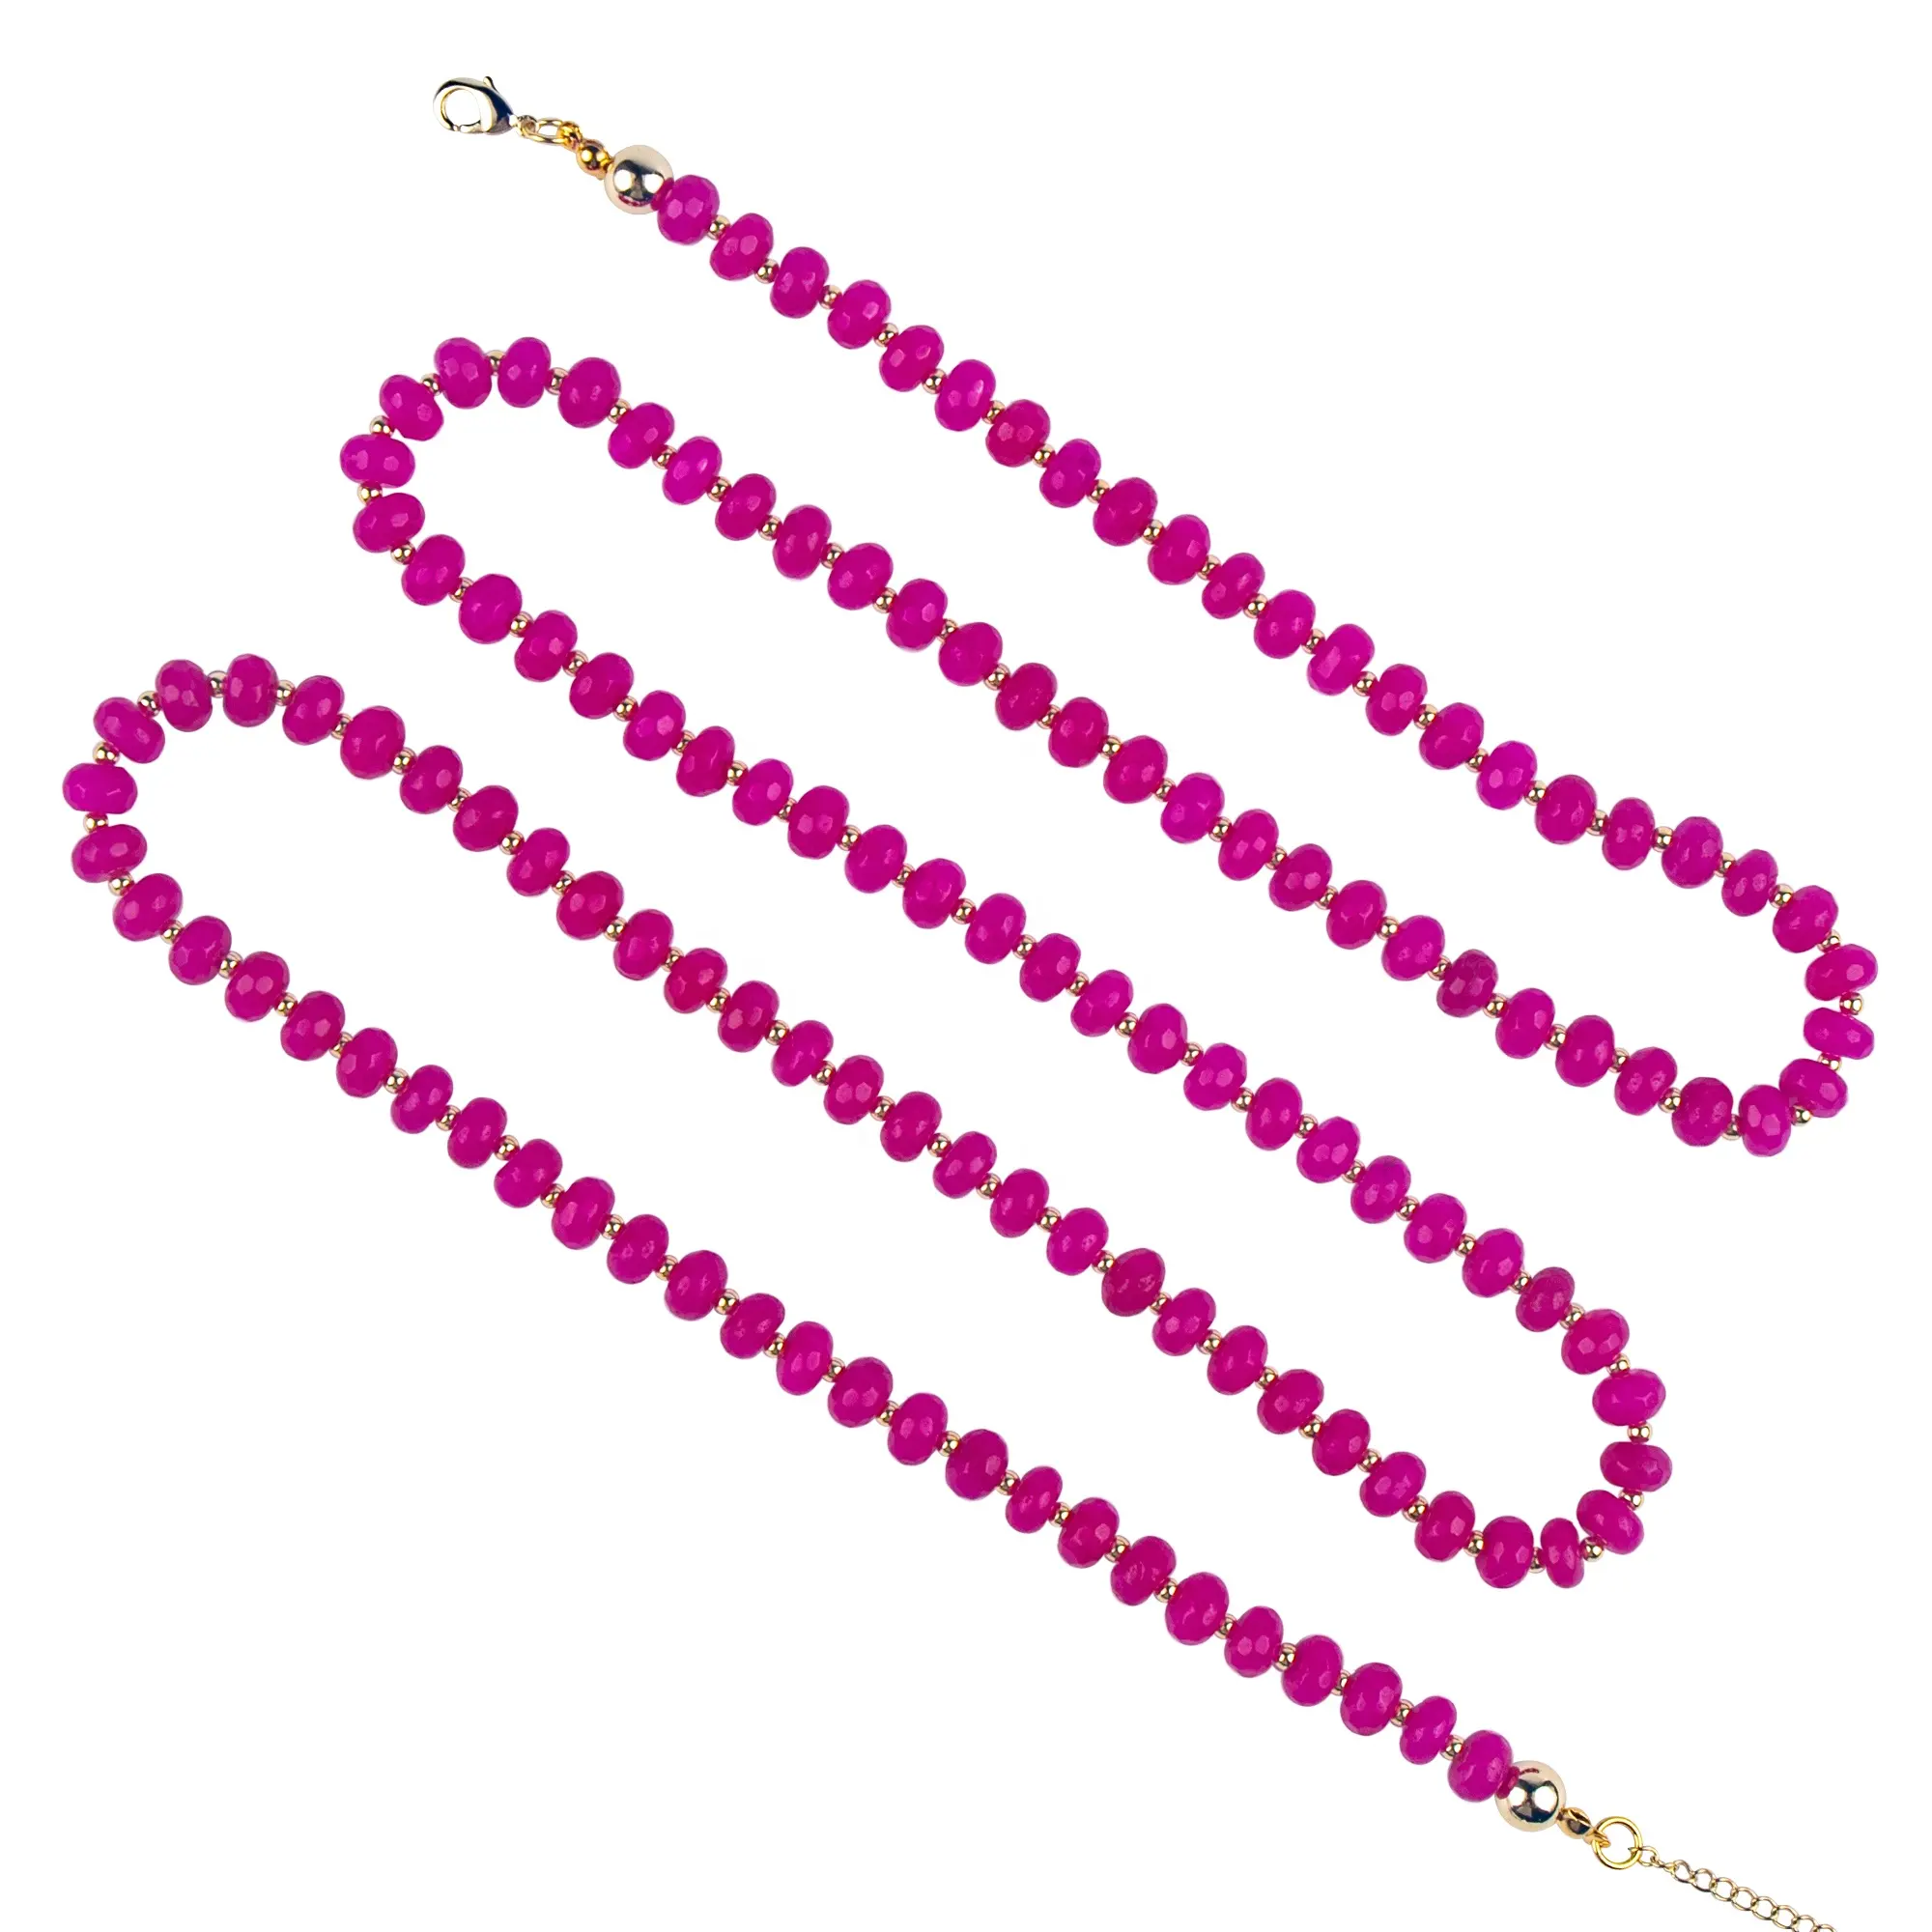 Wholesale New Design 38Inches Navy Hot Pink Natural Gem Stone Beads Long Necklaces Jewelry For Women